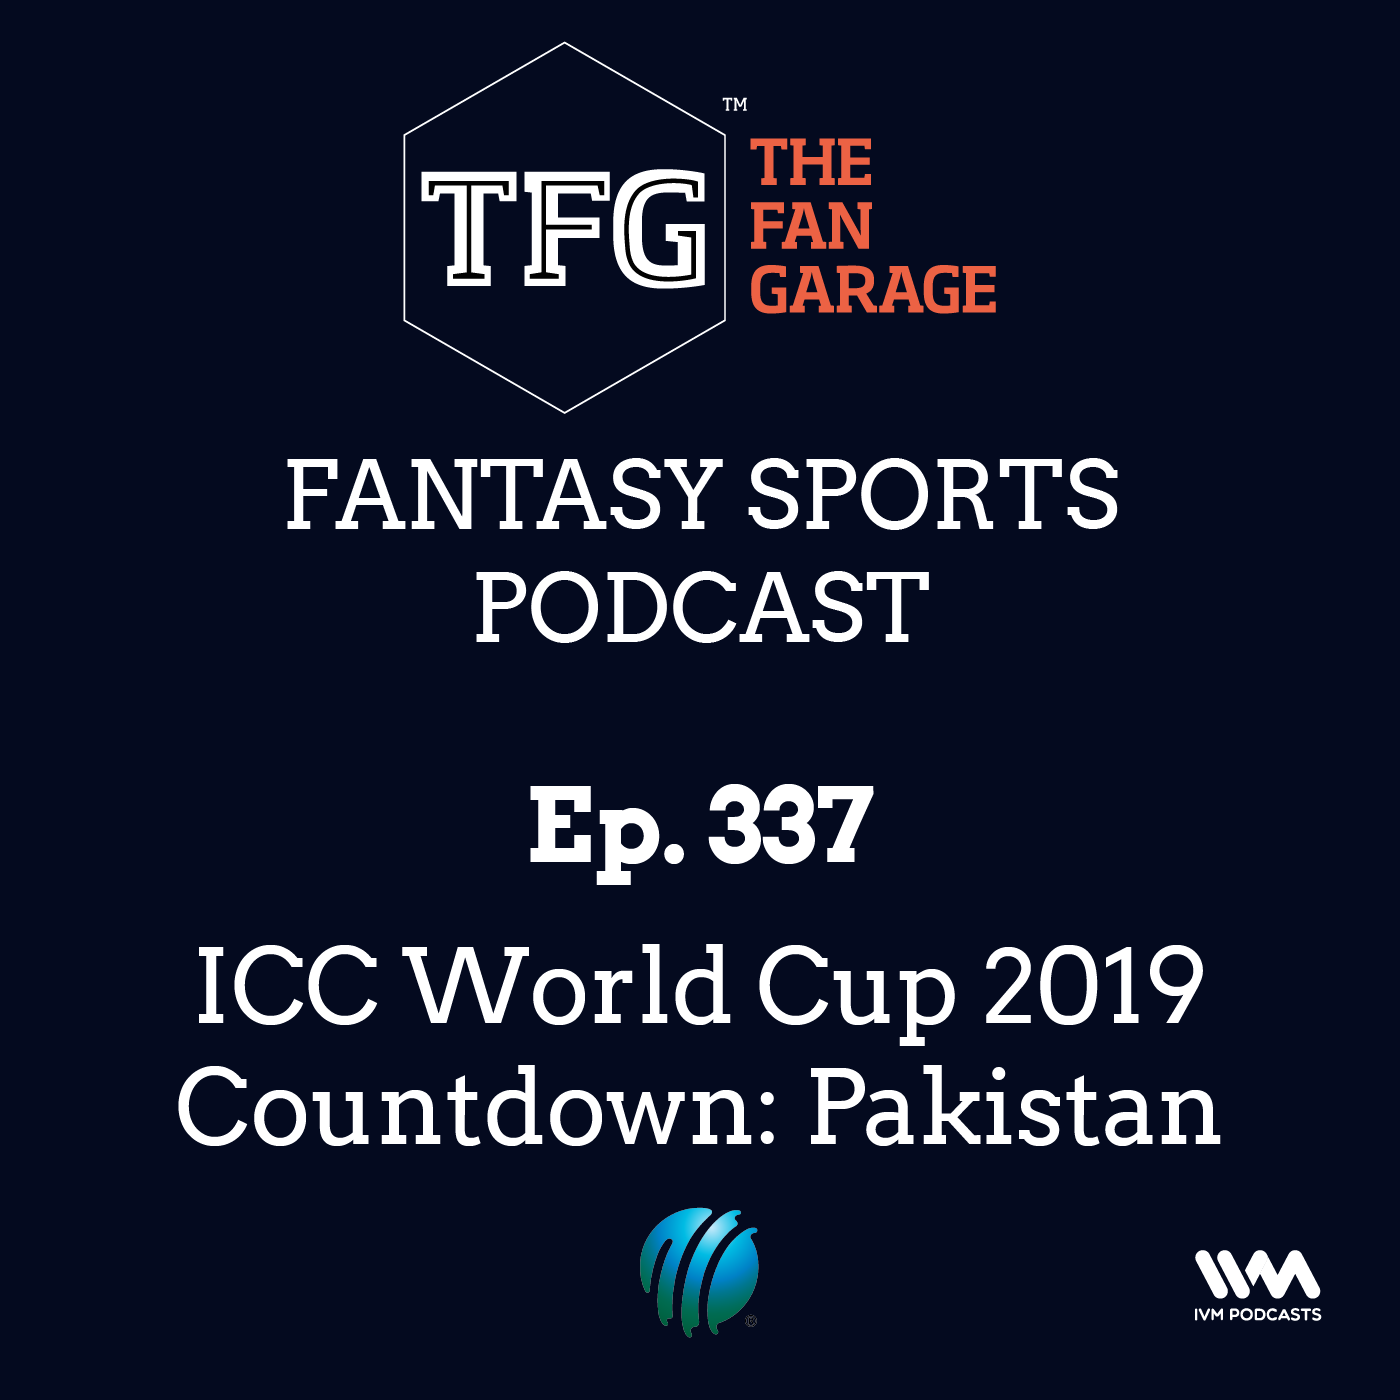 TFG Fantasy Sports Podcast Ep. 337: ICC World Cup 2019 Countdown: Pakistan